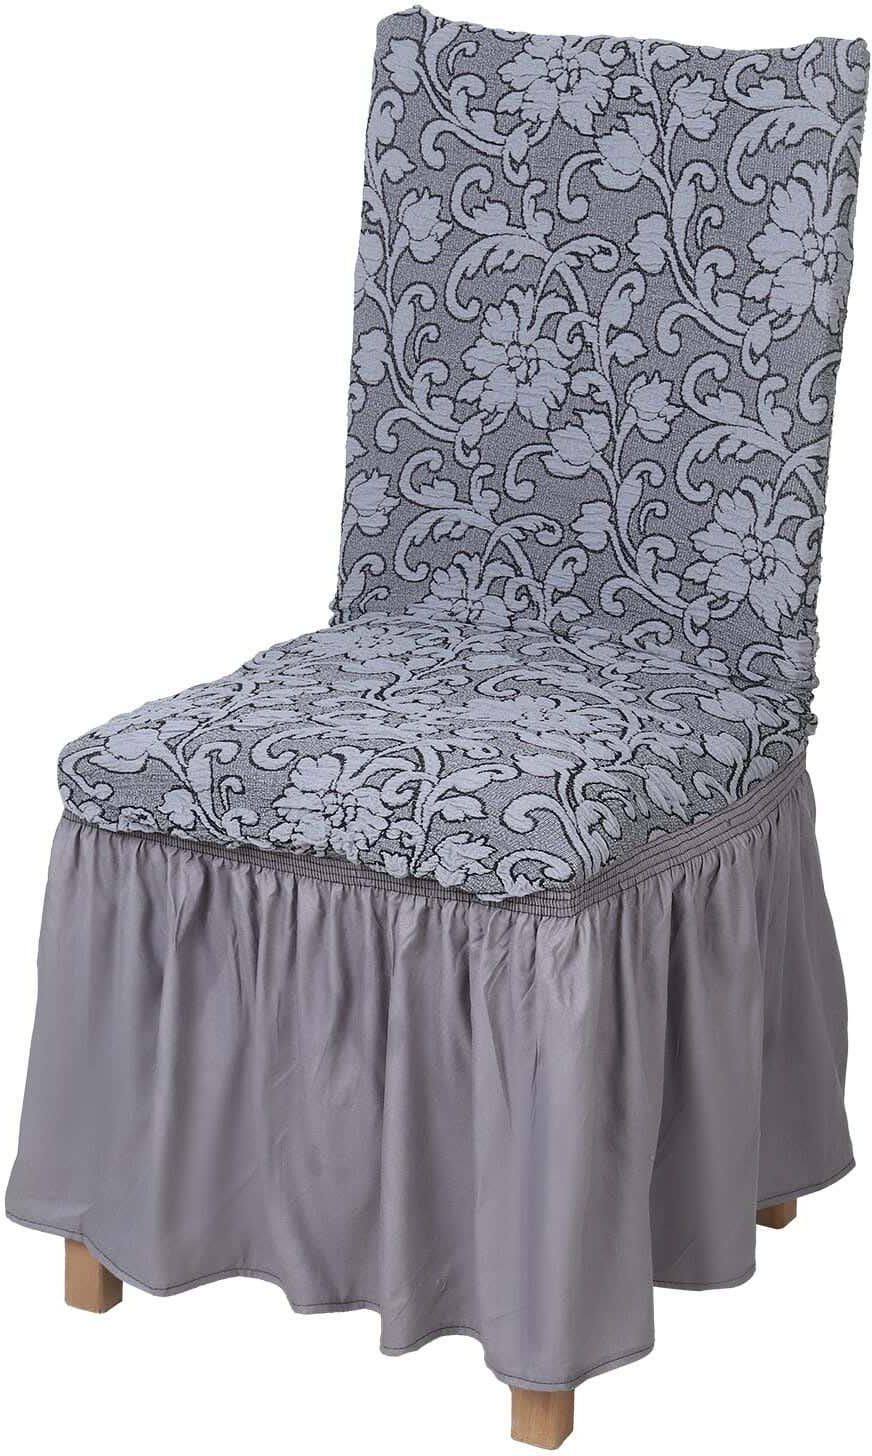 Get Turkan Jacquard Dining Chair Cover Set, 6 Pieces, Approximately 2100 Grm - Grey with best offers | Raneen.com